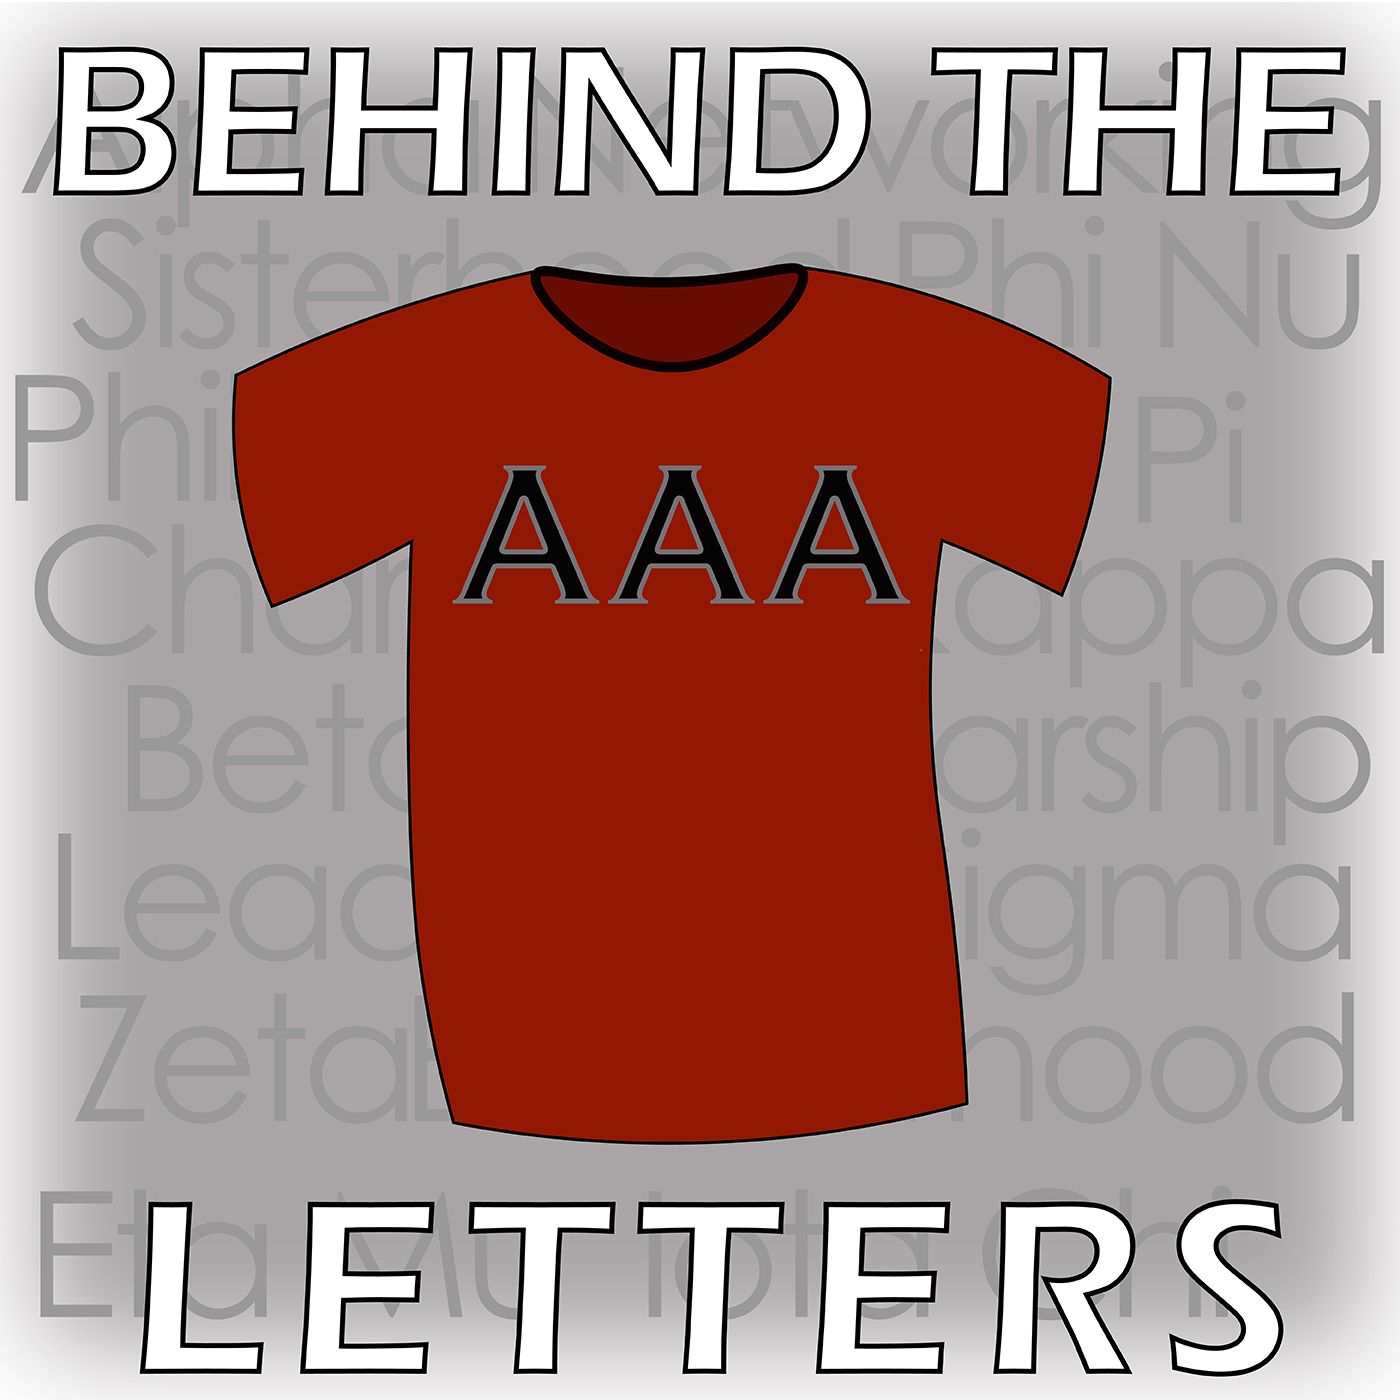 Behind the Letters